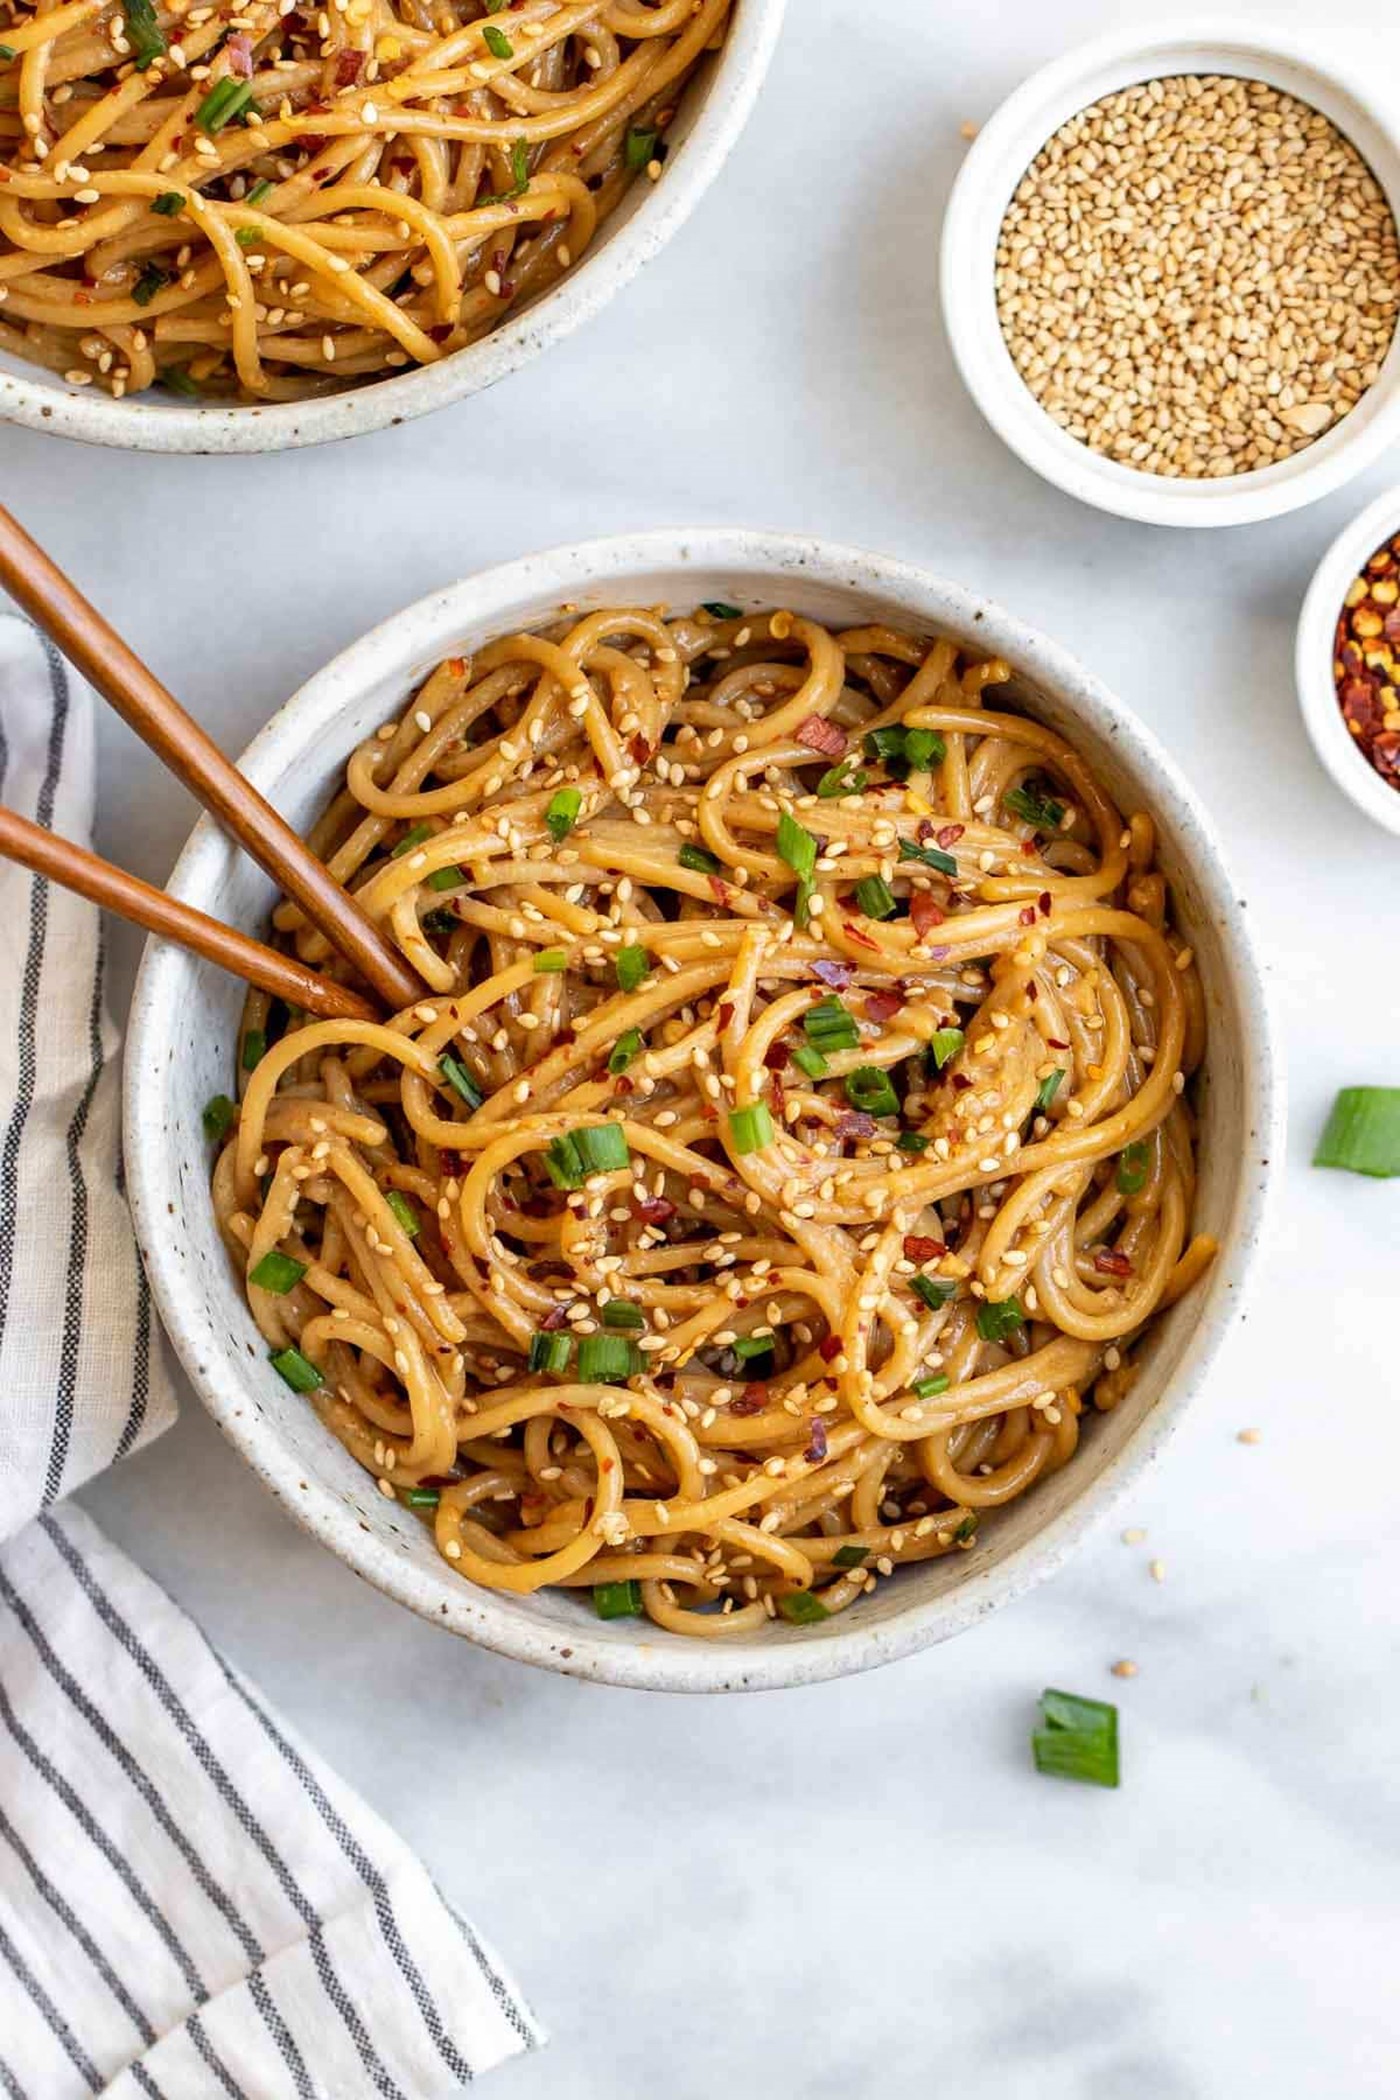 15 Minute Garlic Sesame Noodles, Eat with Clarity